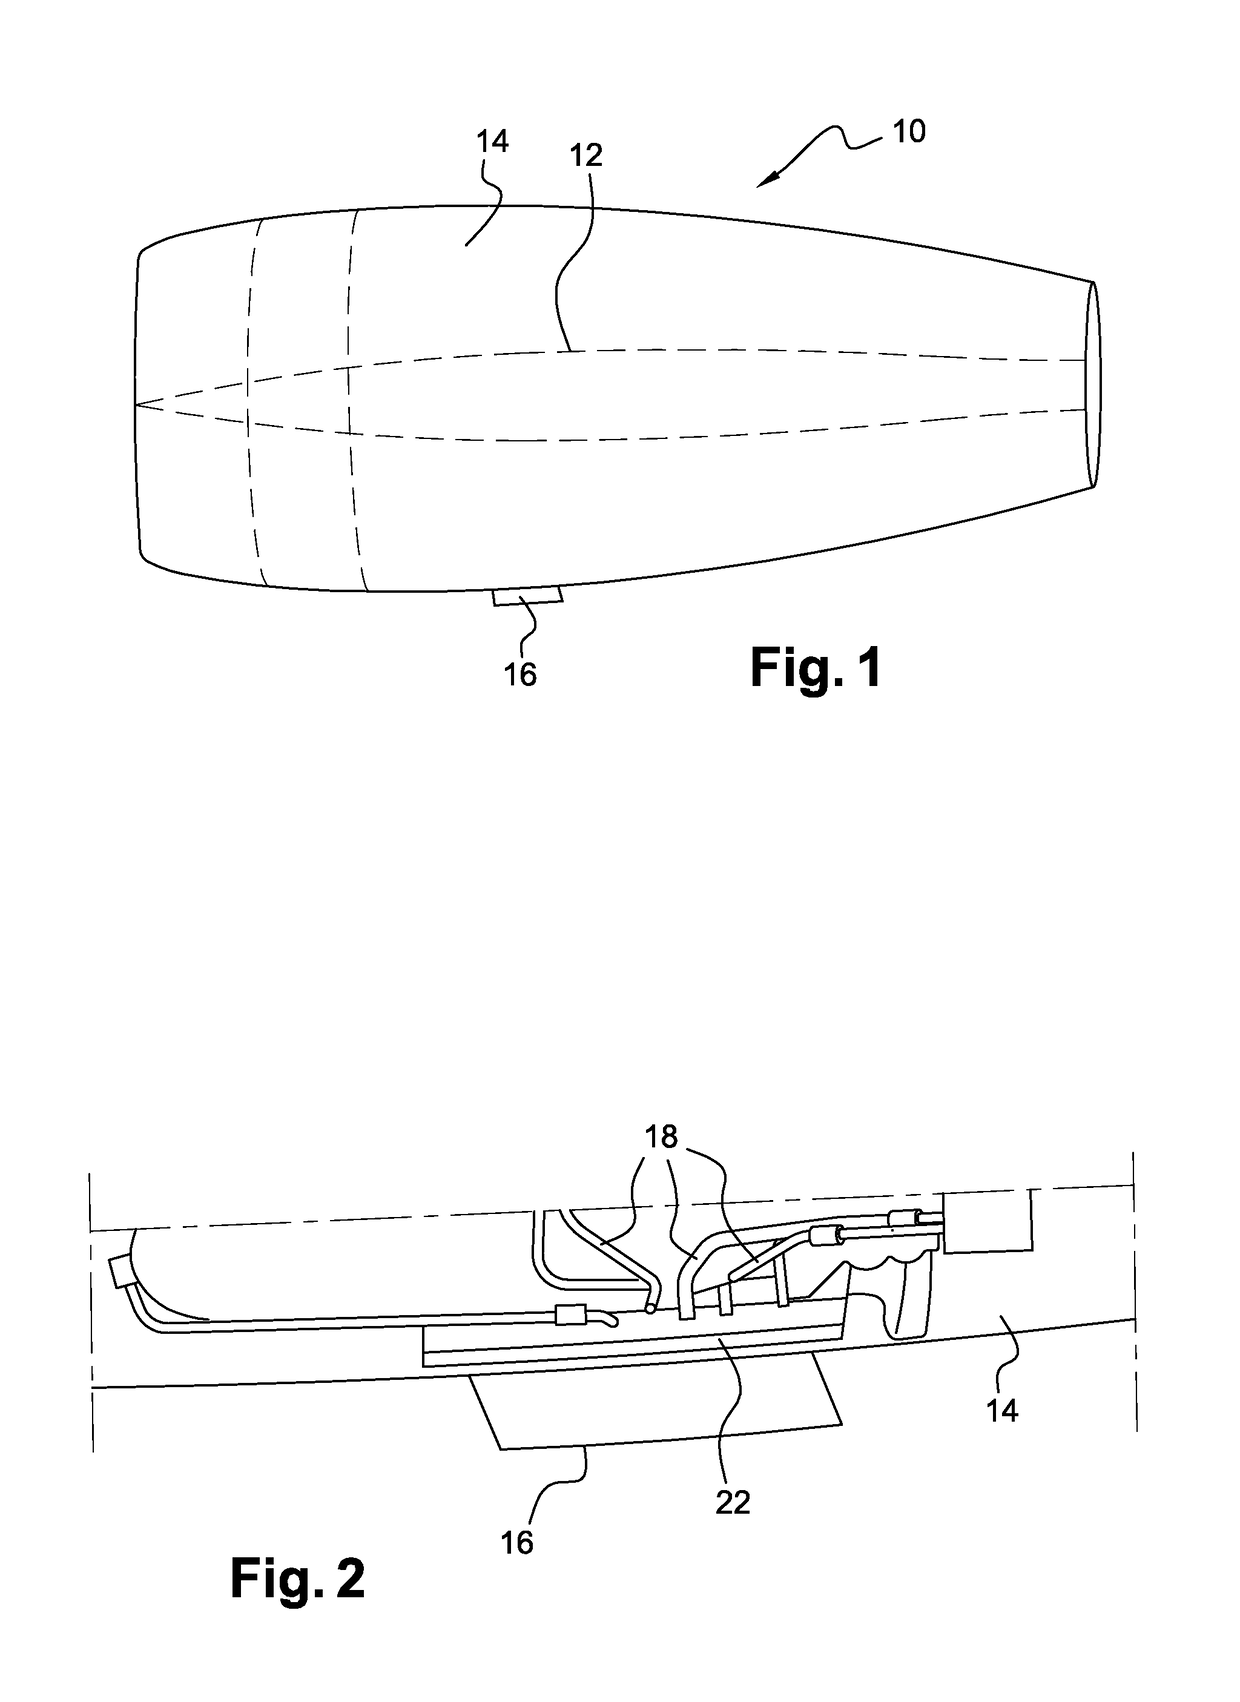 Drained fluid evacuation stub for a propulsion assembly